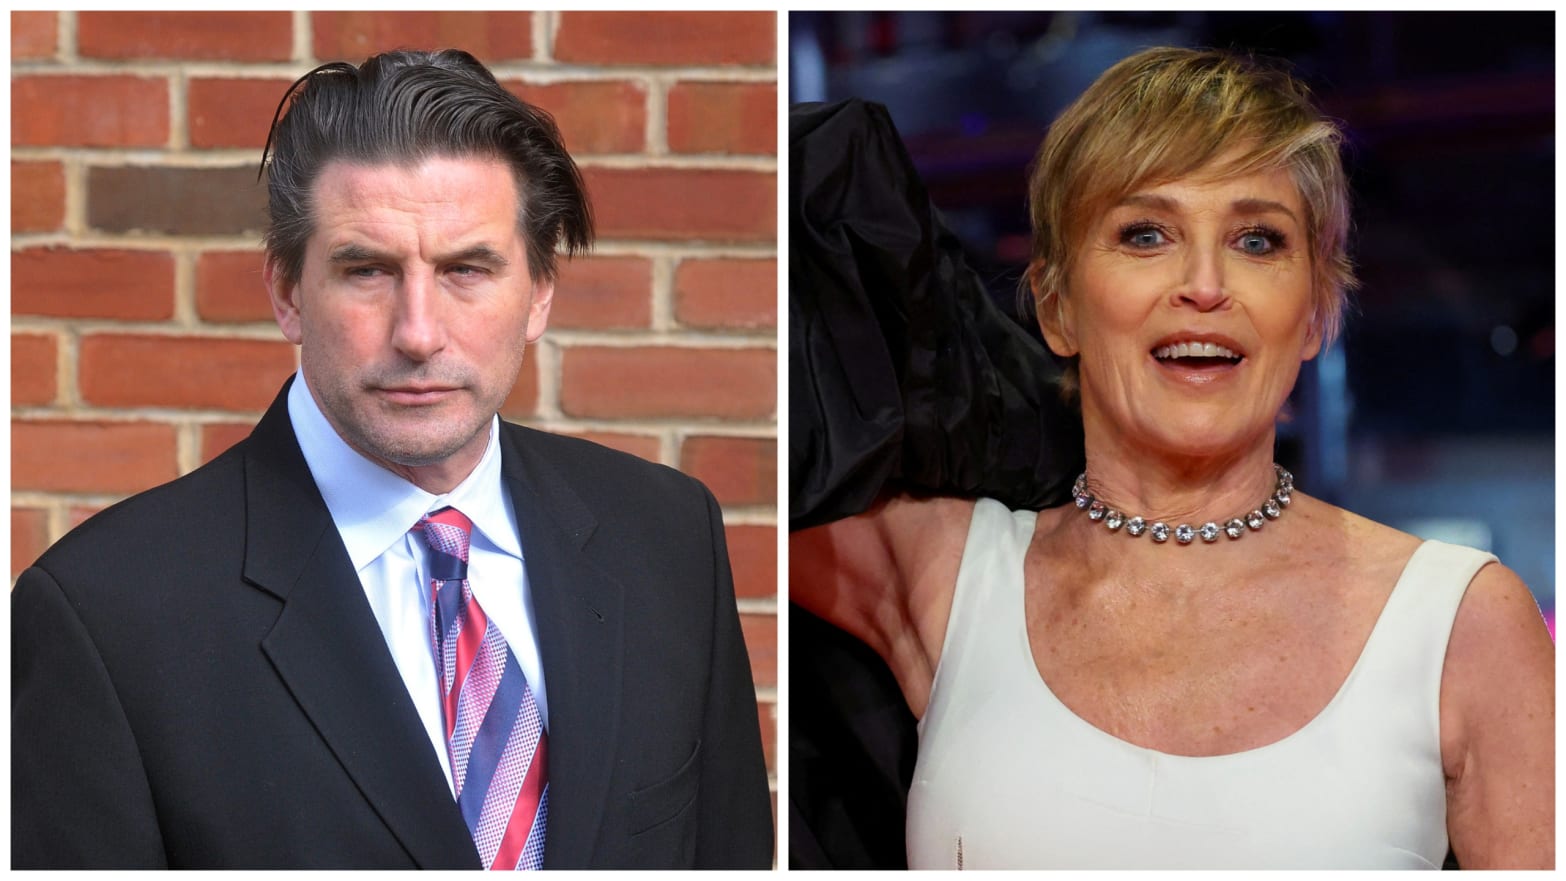 Side-by-side photos of Billy Baldwin, left, and Sharon Stone, right.